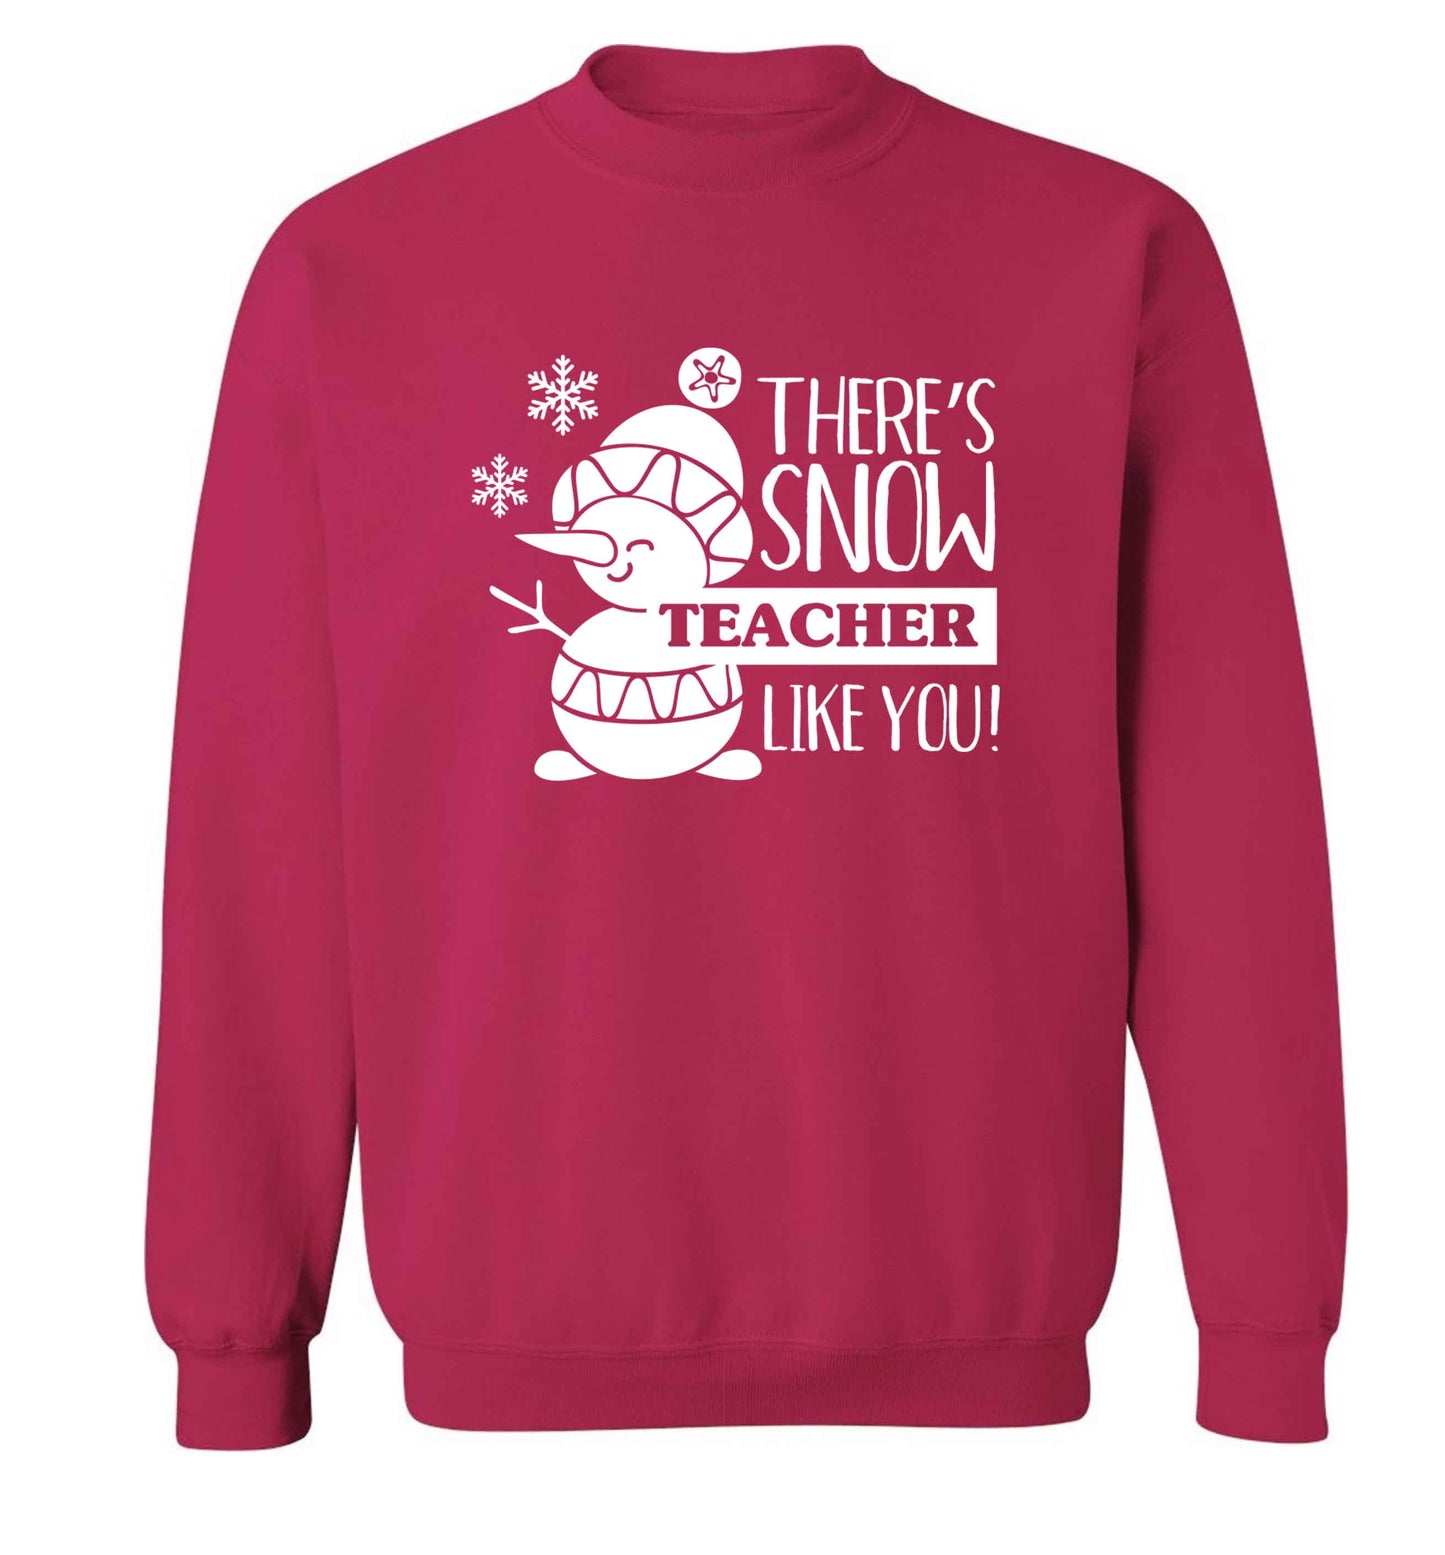 There's snow teacher like you adult's unisex pink sweater 2XL